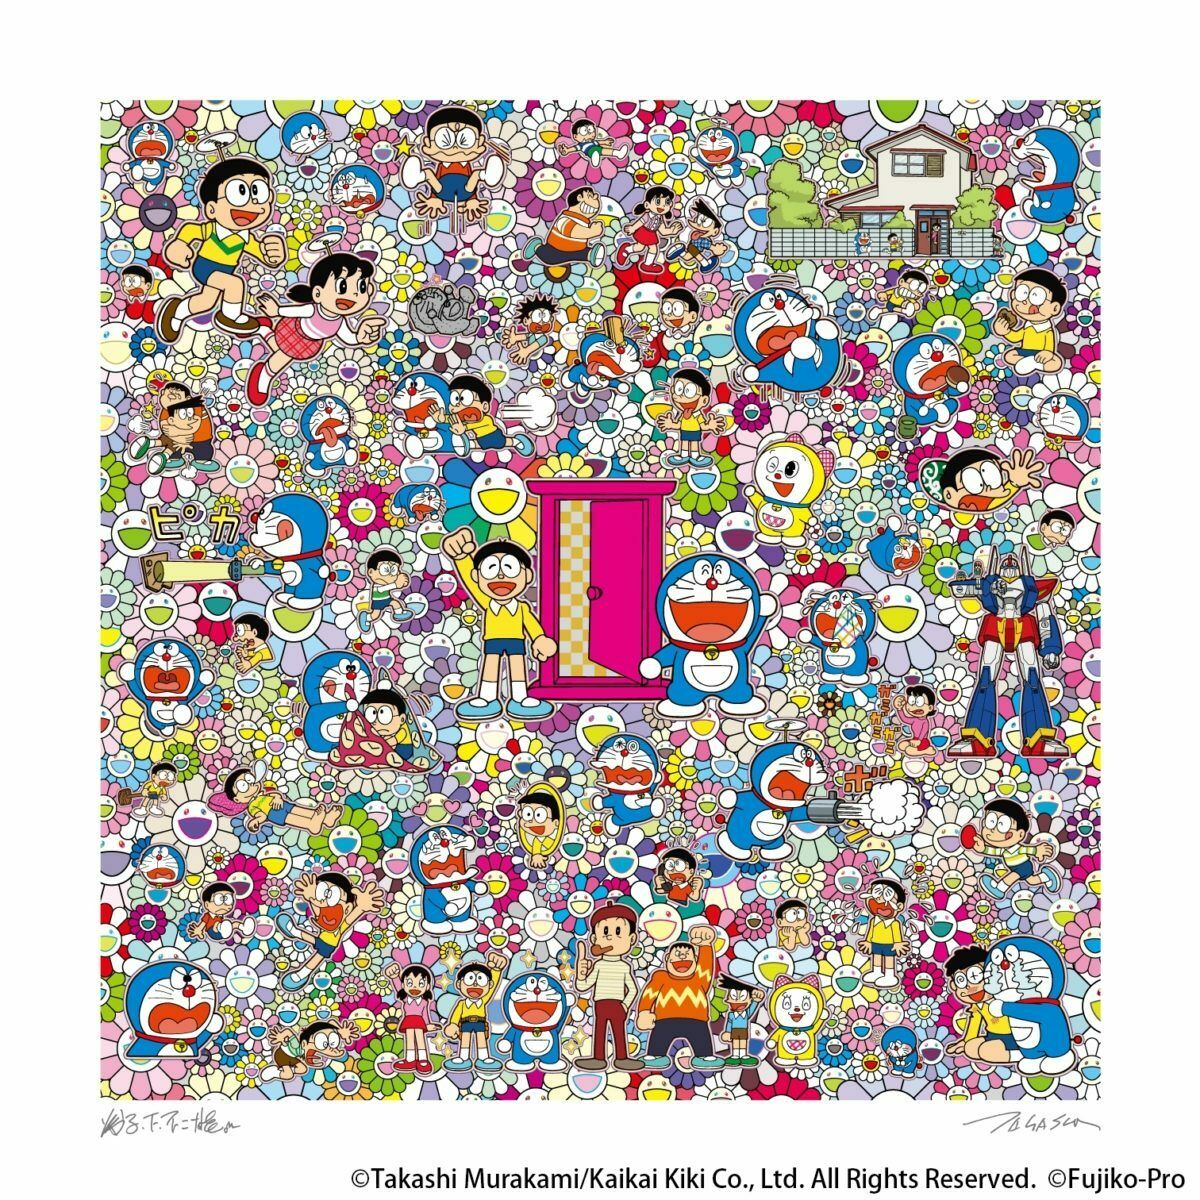 Takashi Murakami A Sketch of Anywhere Door and an Excellent Day